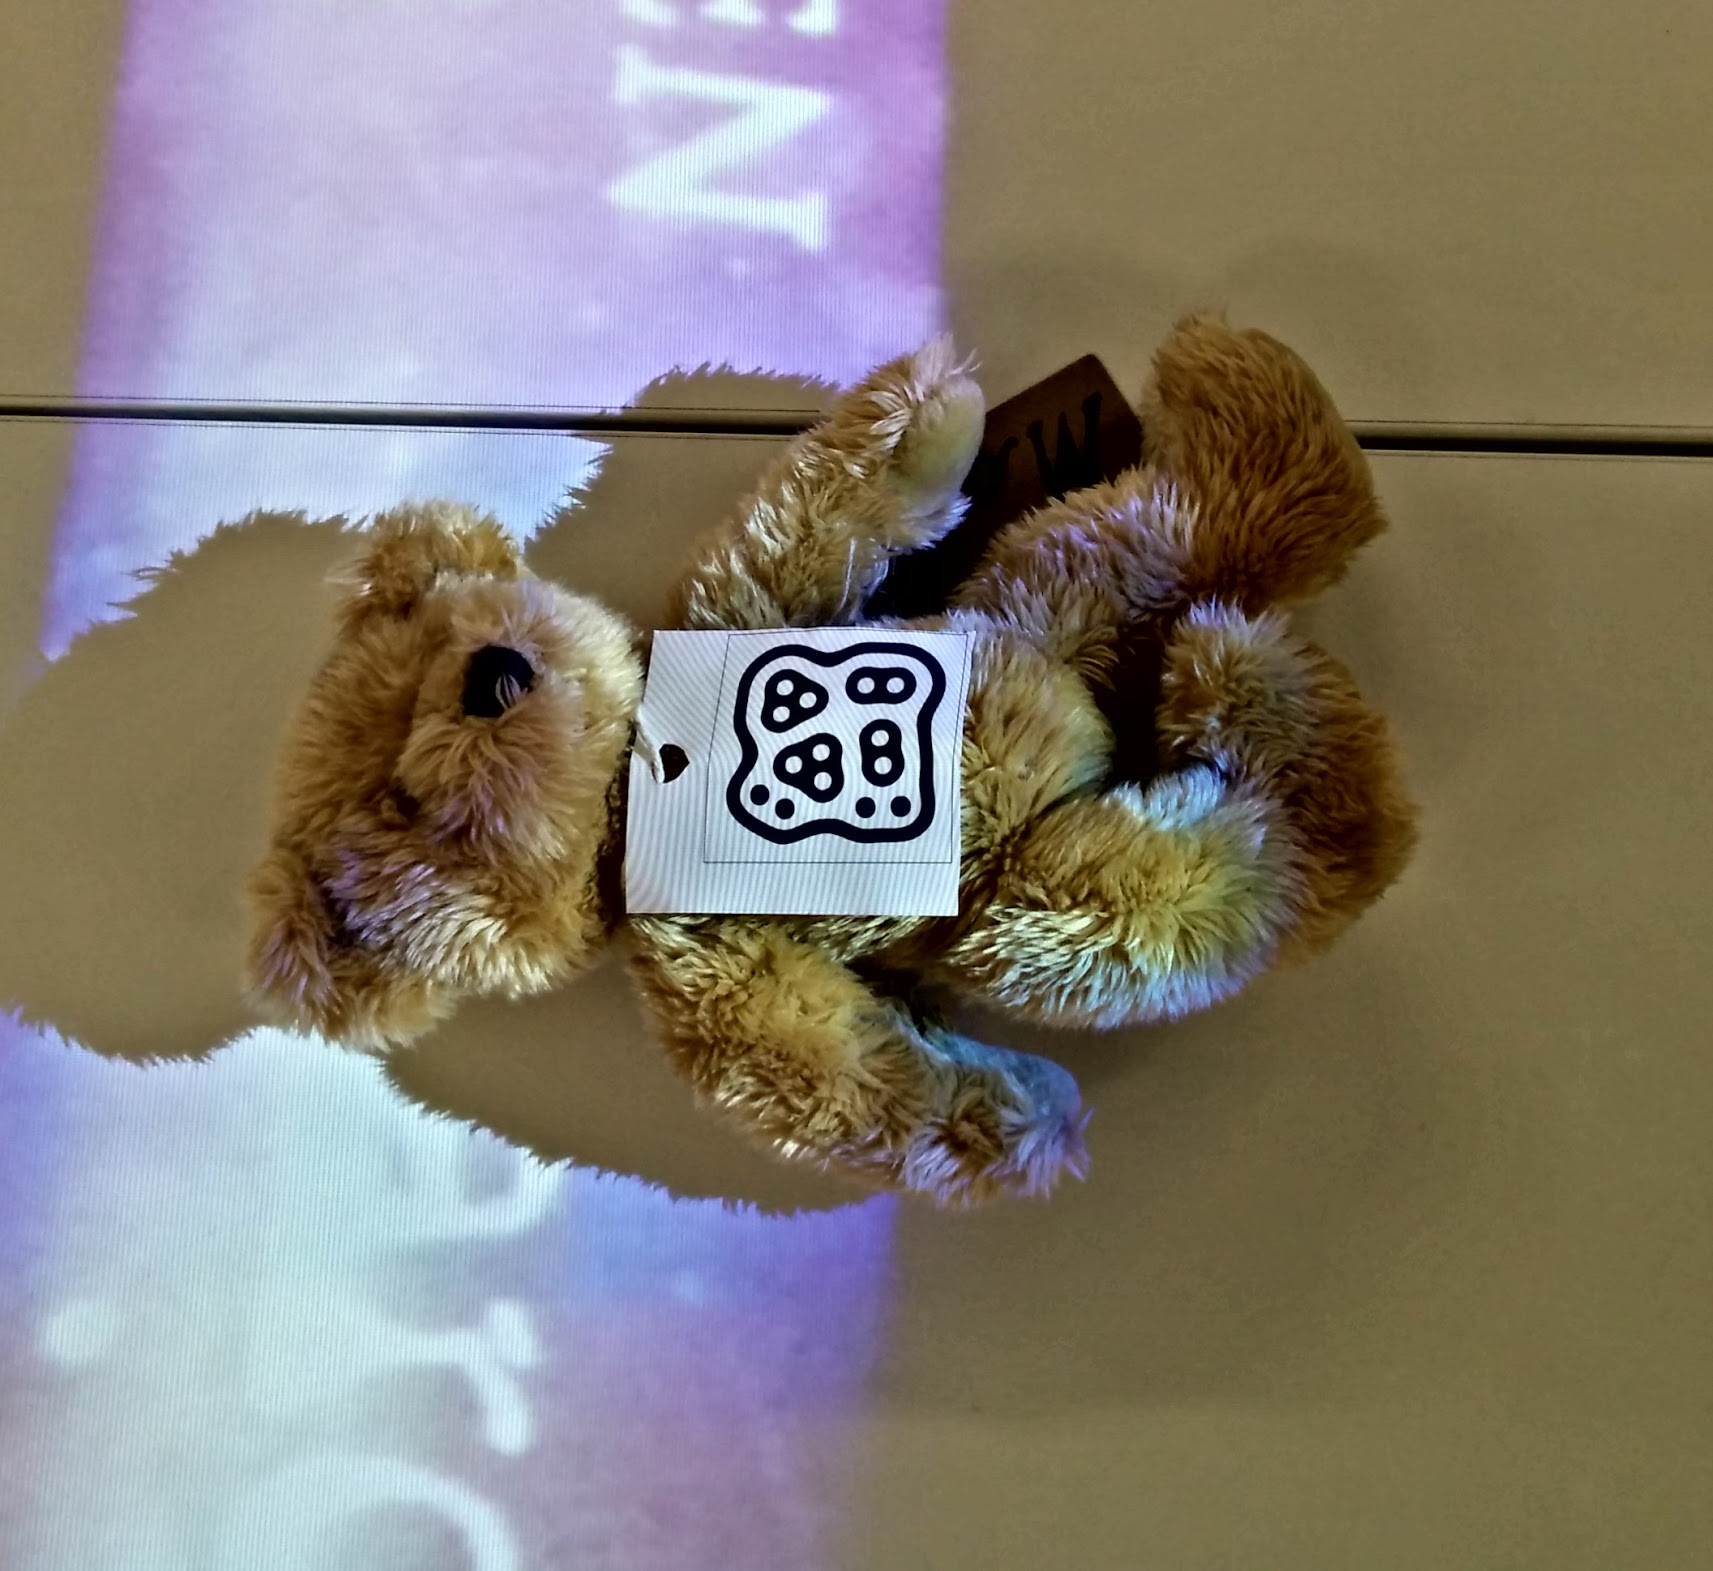 'Mo', the Mass Observation Archive mascot, volunteers to pilot the fiducial tracker.